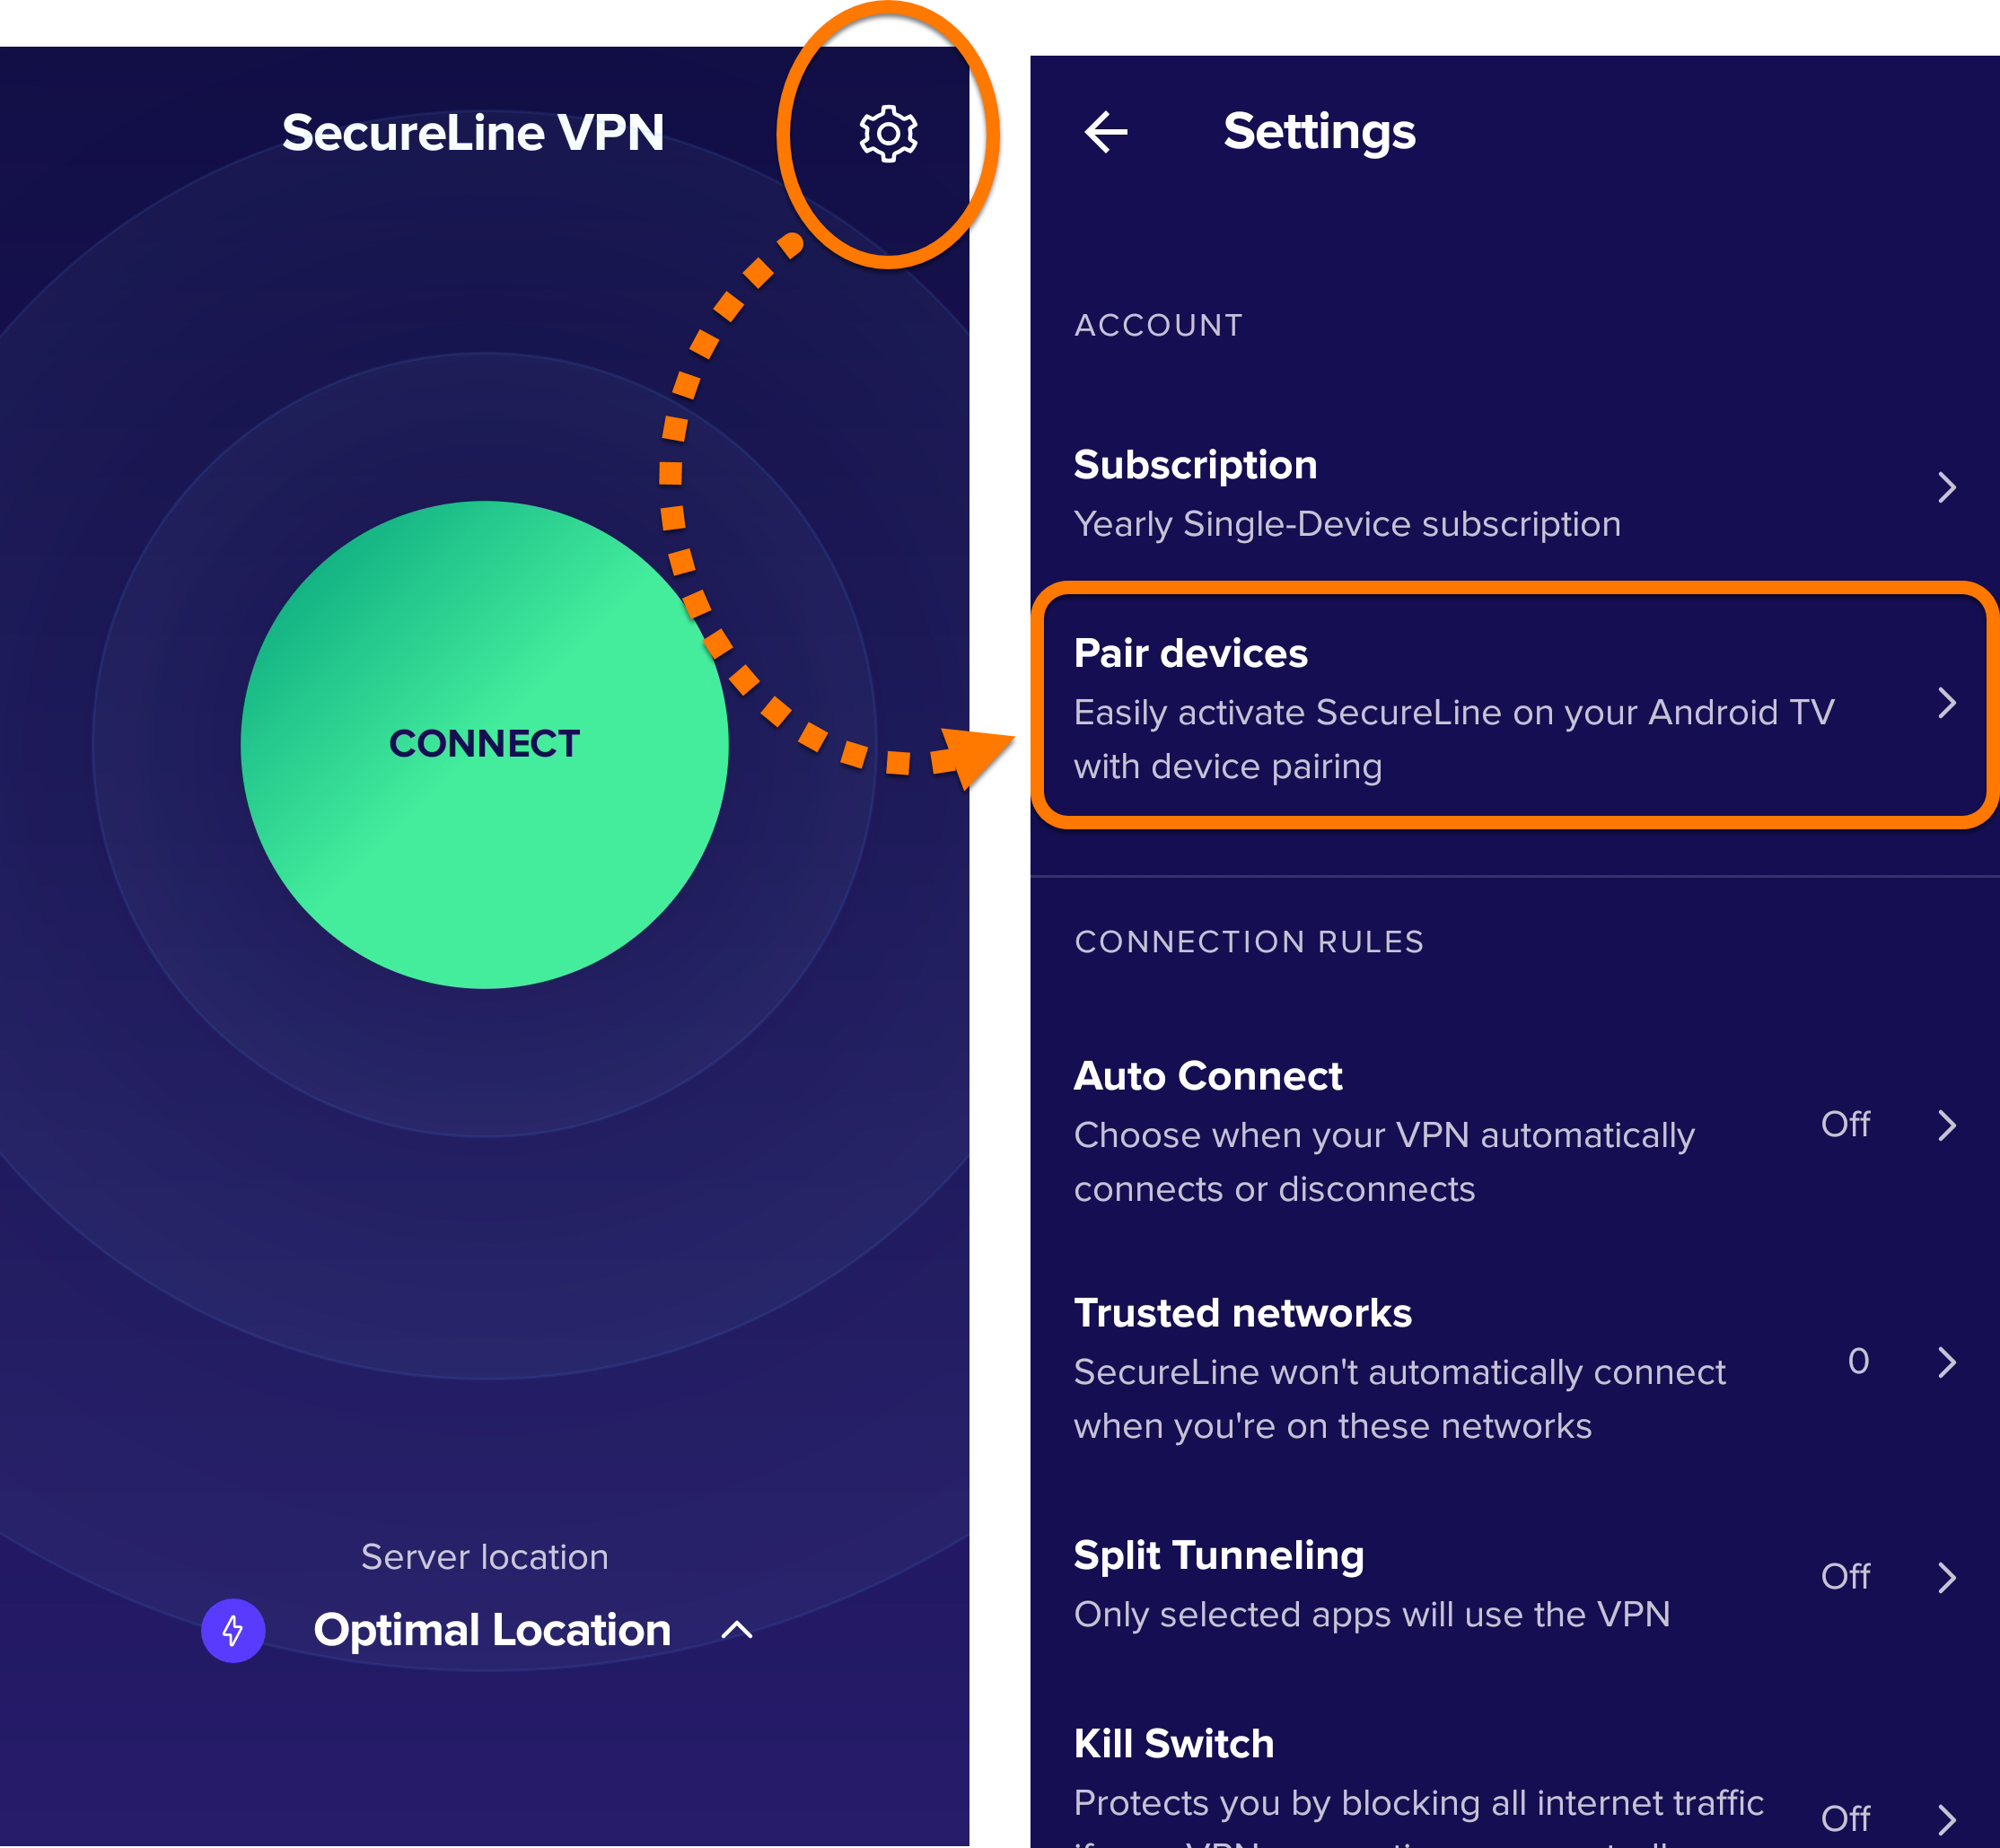 what is avast secureline vpn multi device